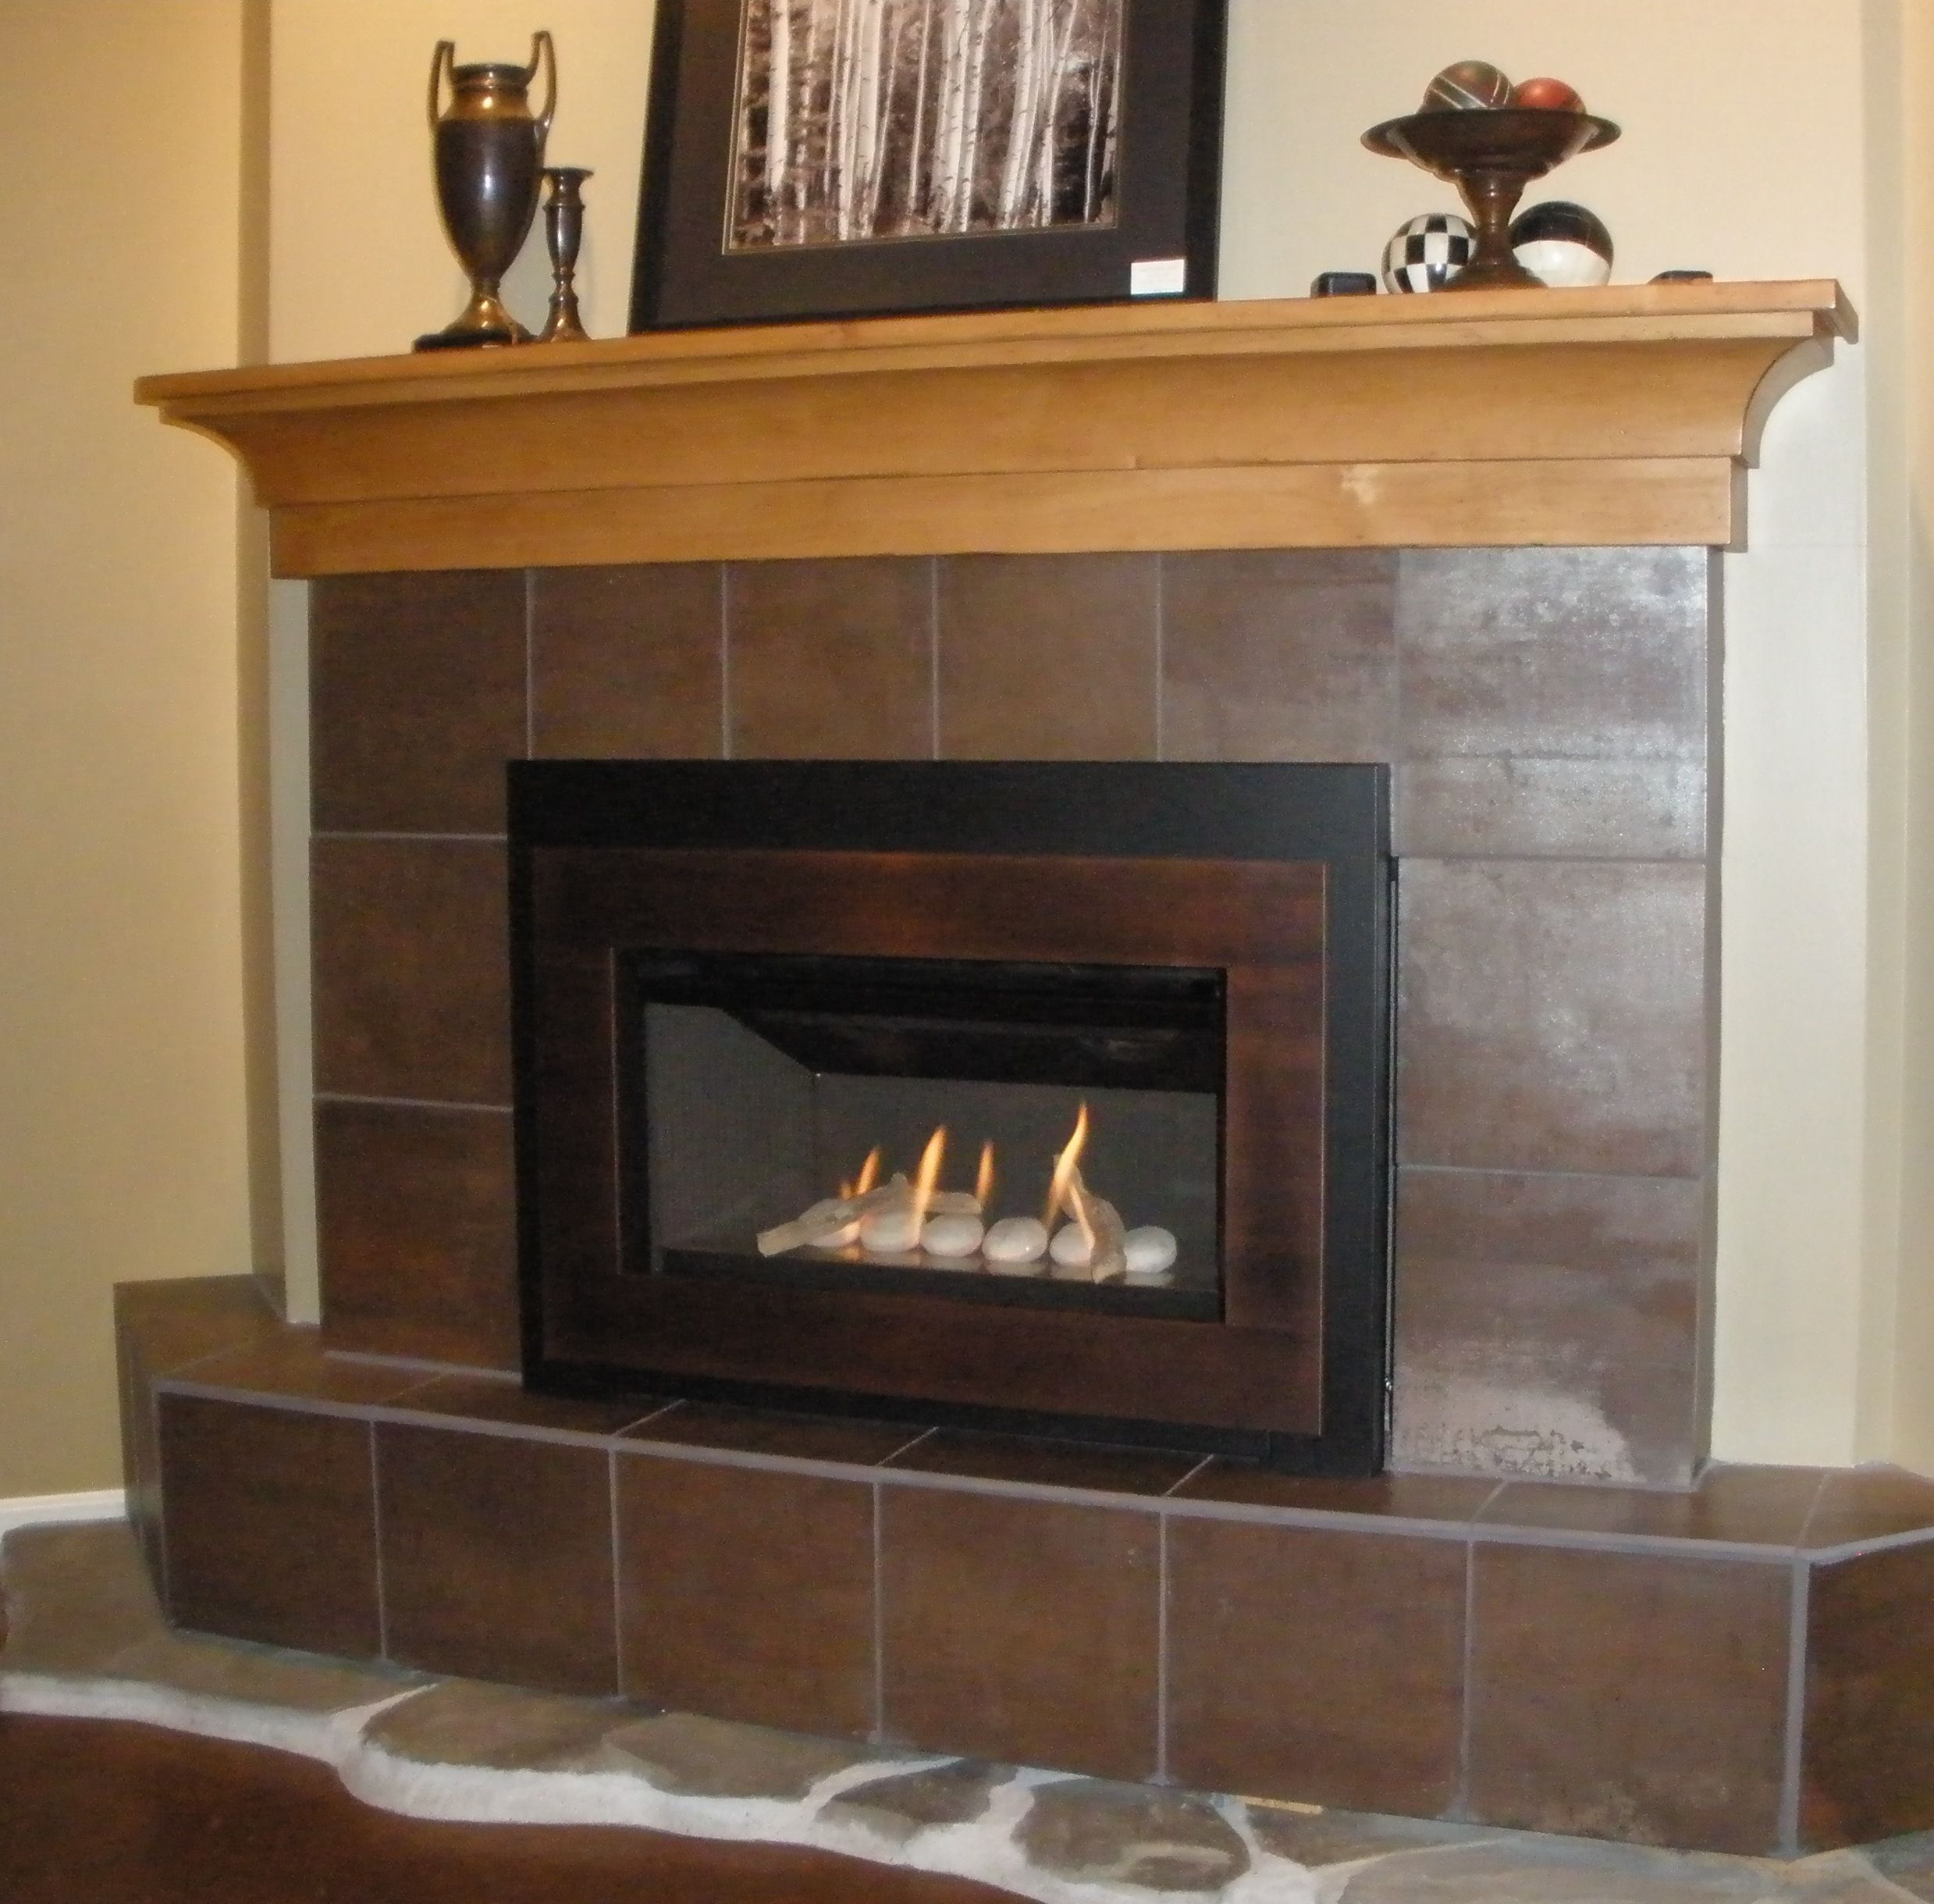 Regency Fireplace Insert Prices Awesome Pin On Valor Radiant Gas Fireplaces Midwest Dealer